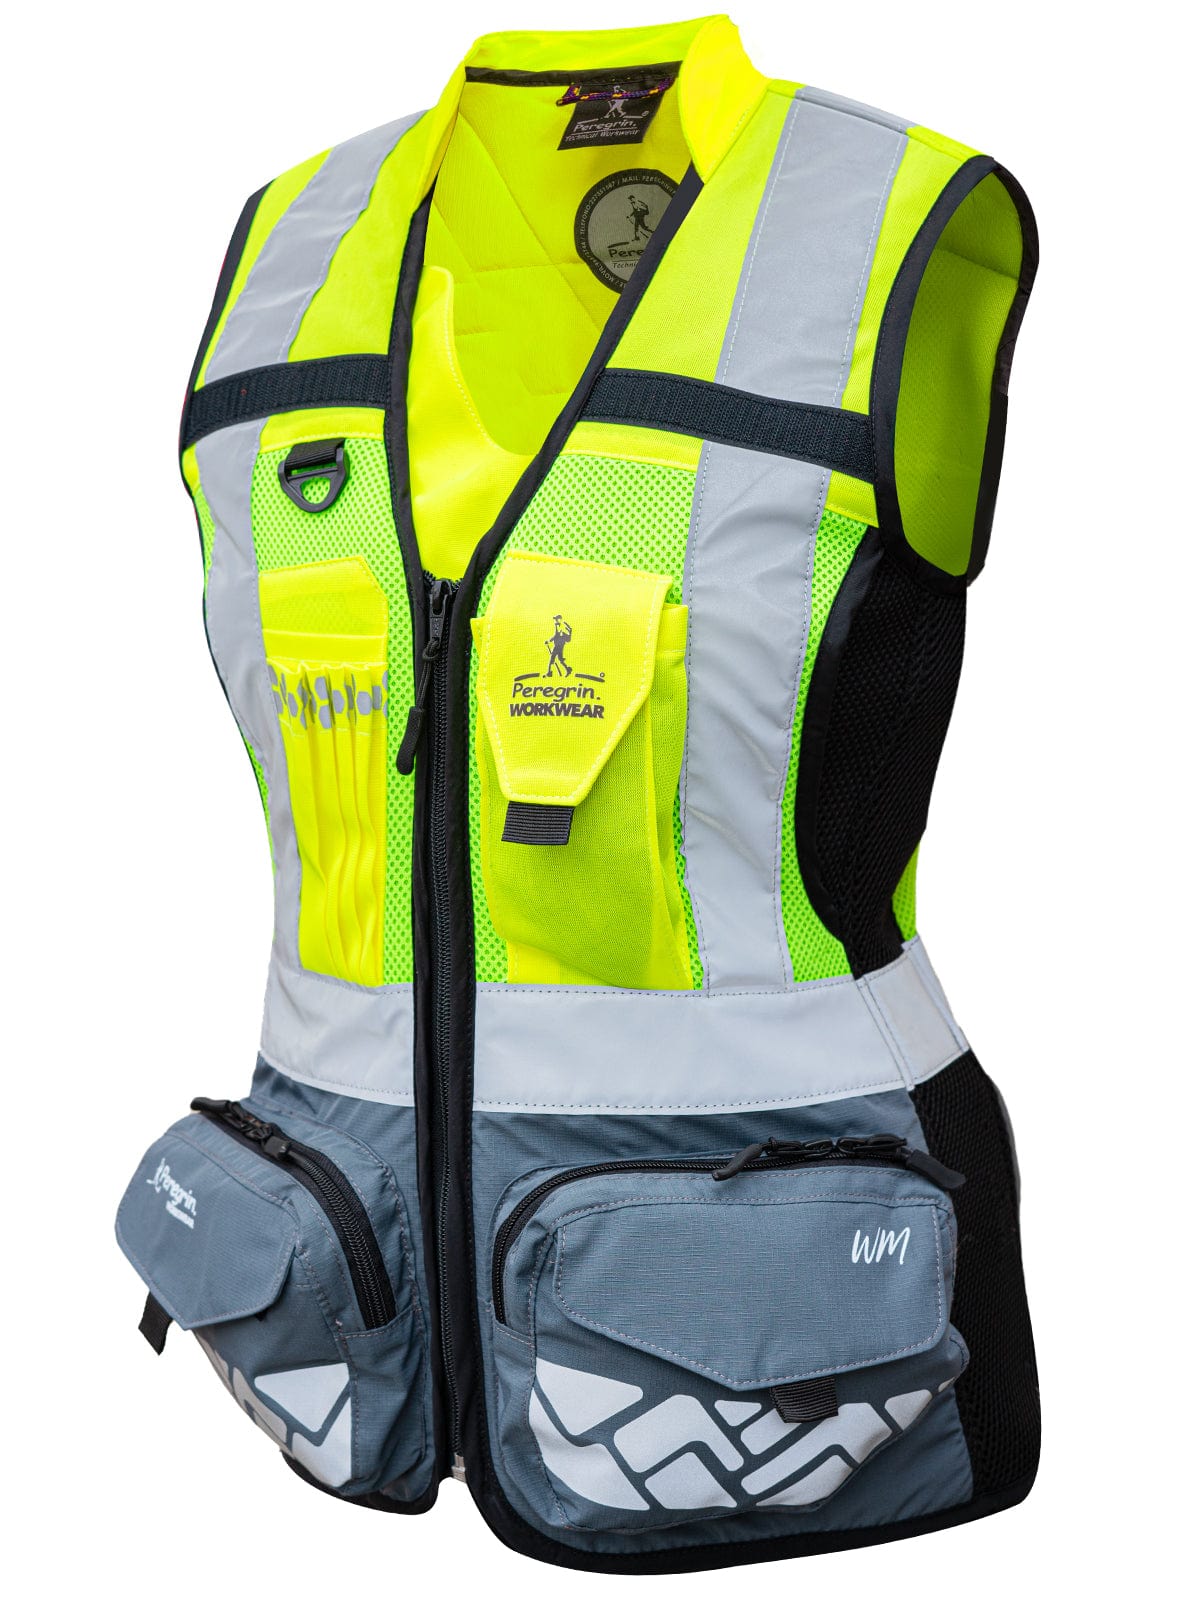 Peregrin Reflective Safety Vest Woman N1 Executive Green